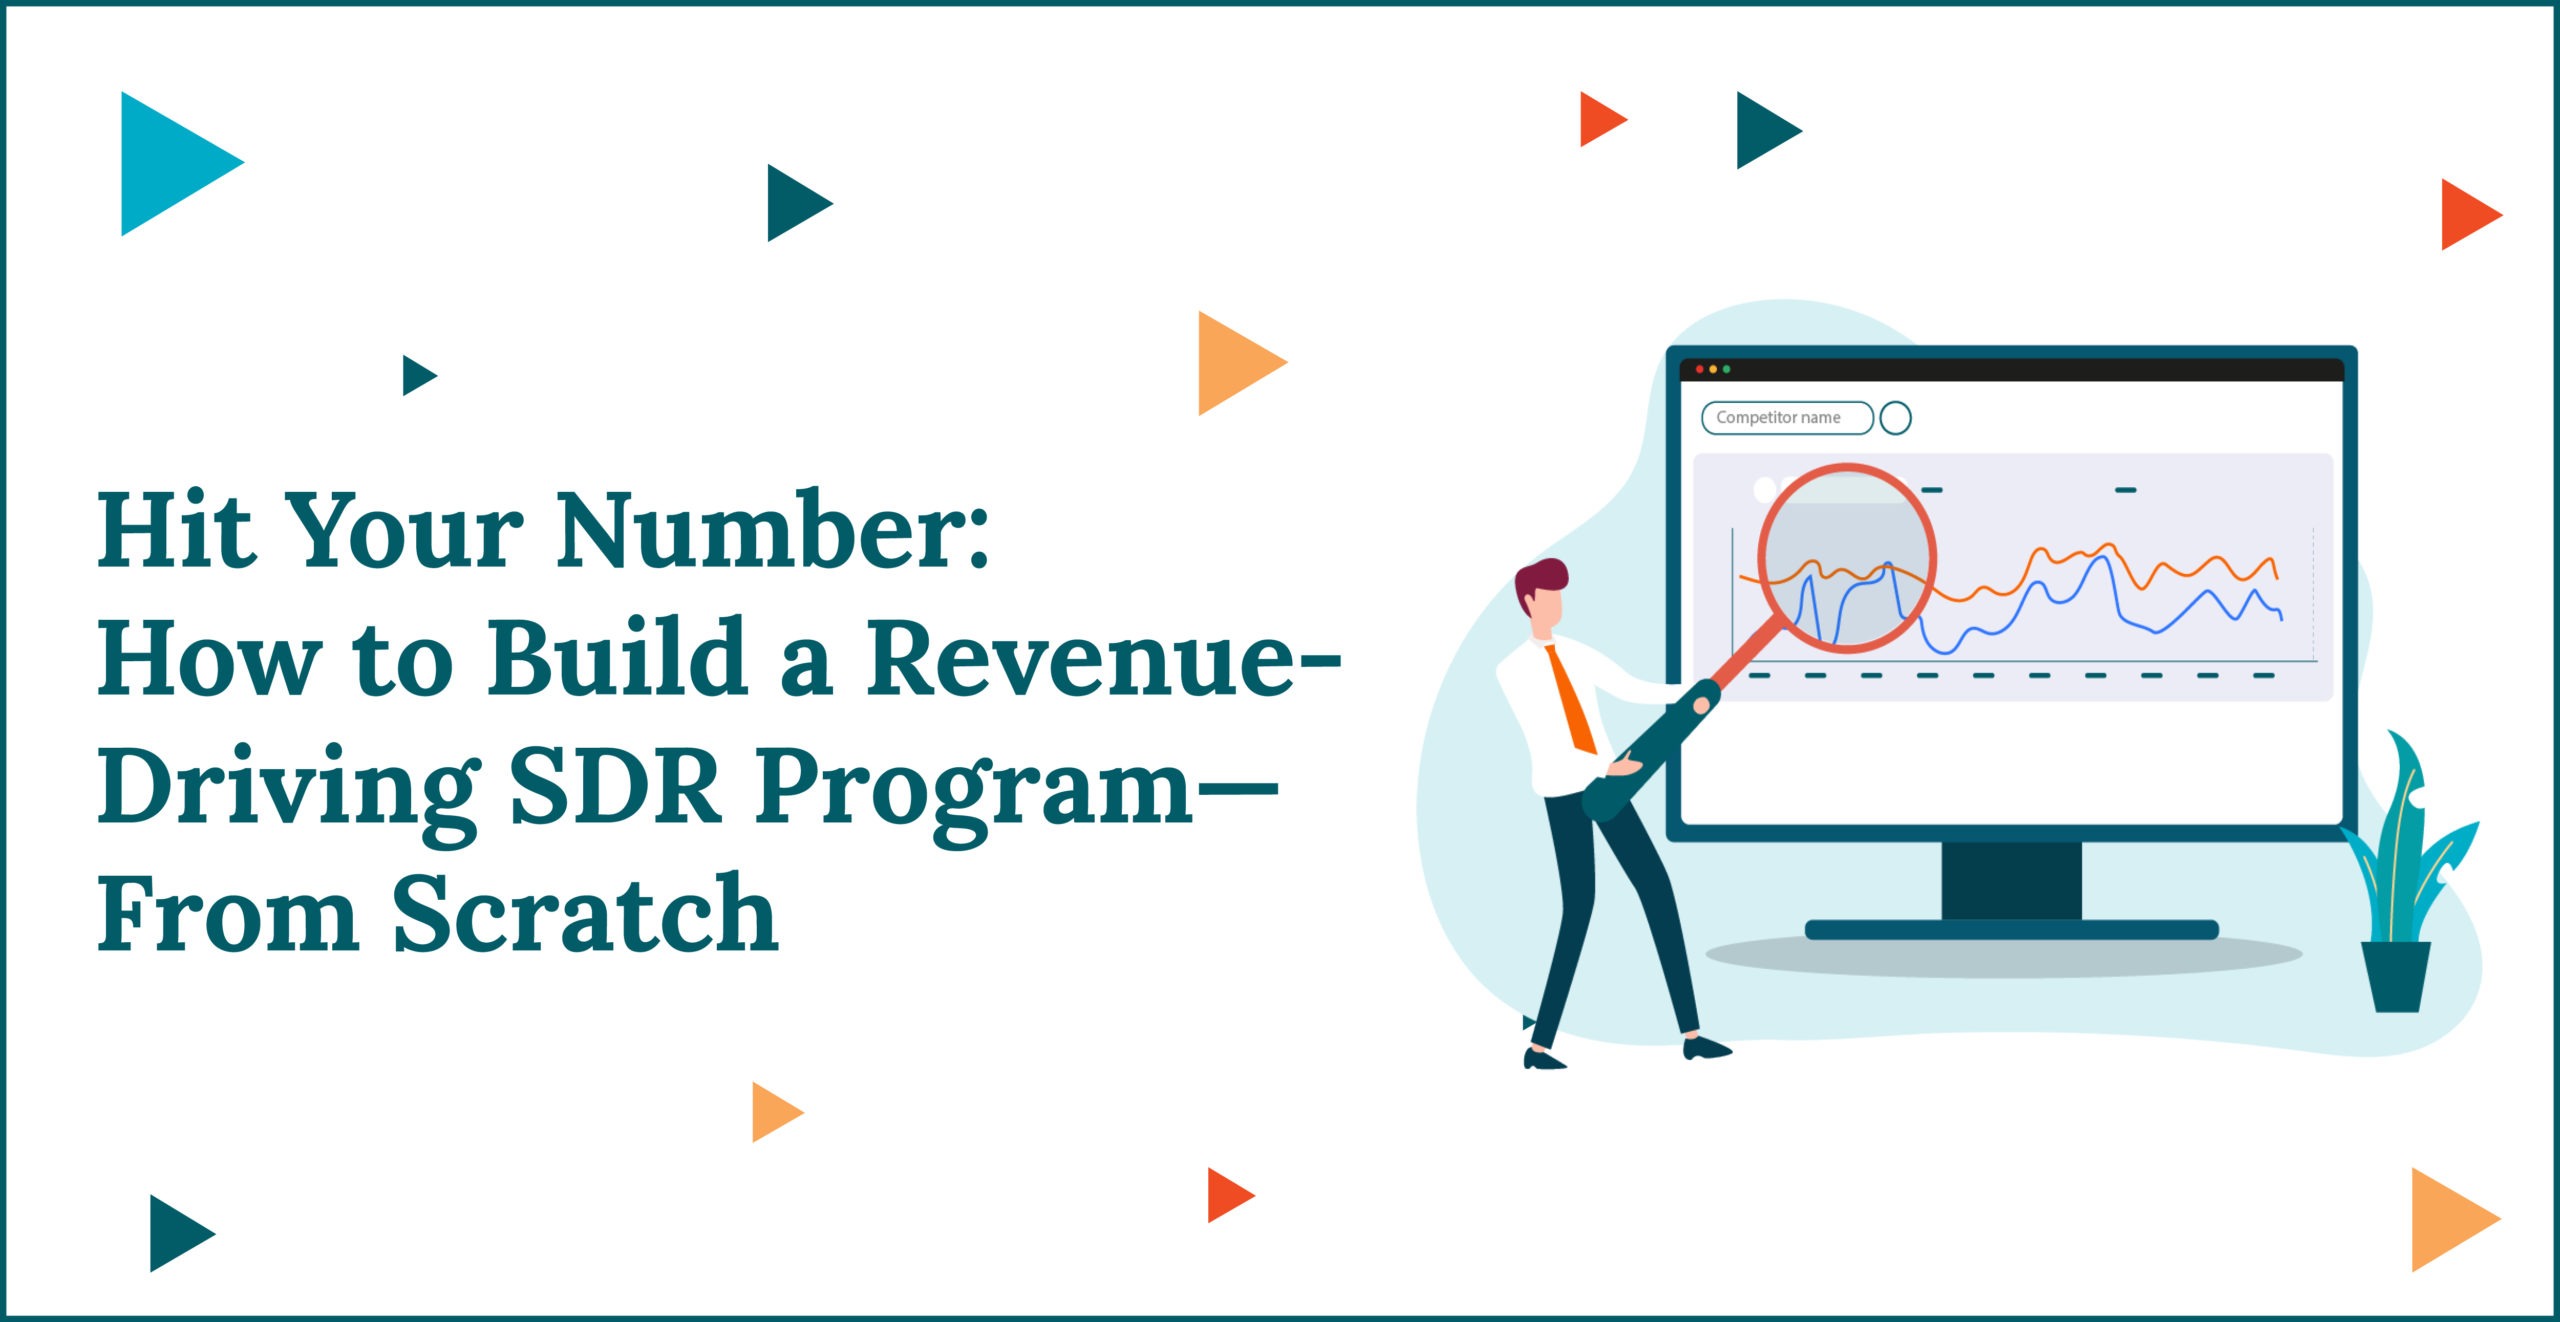 Hit Your Number: How to Build a Revenue-Driving SDR Program—From Scratch